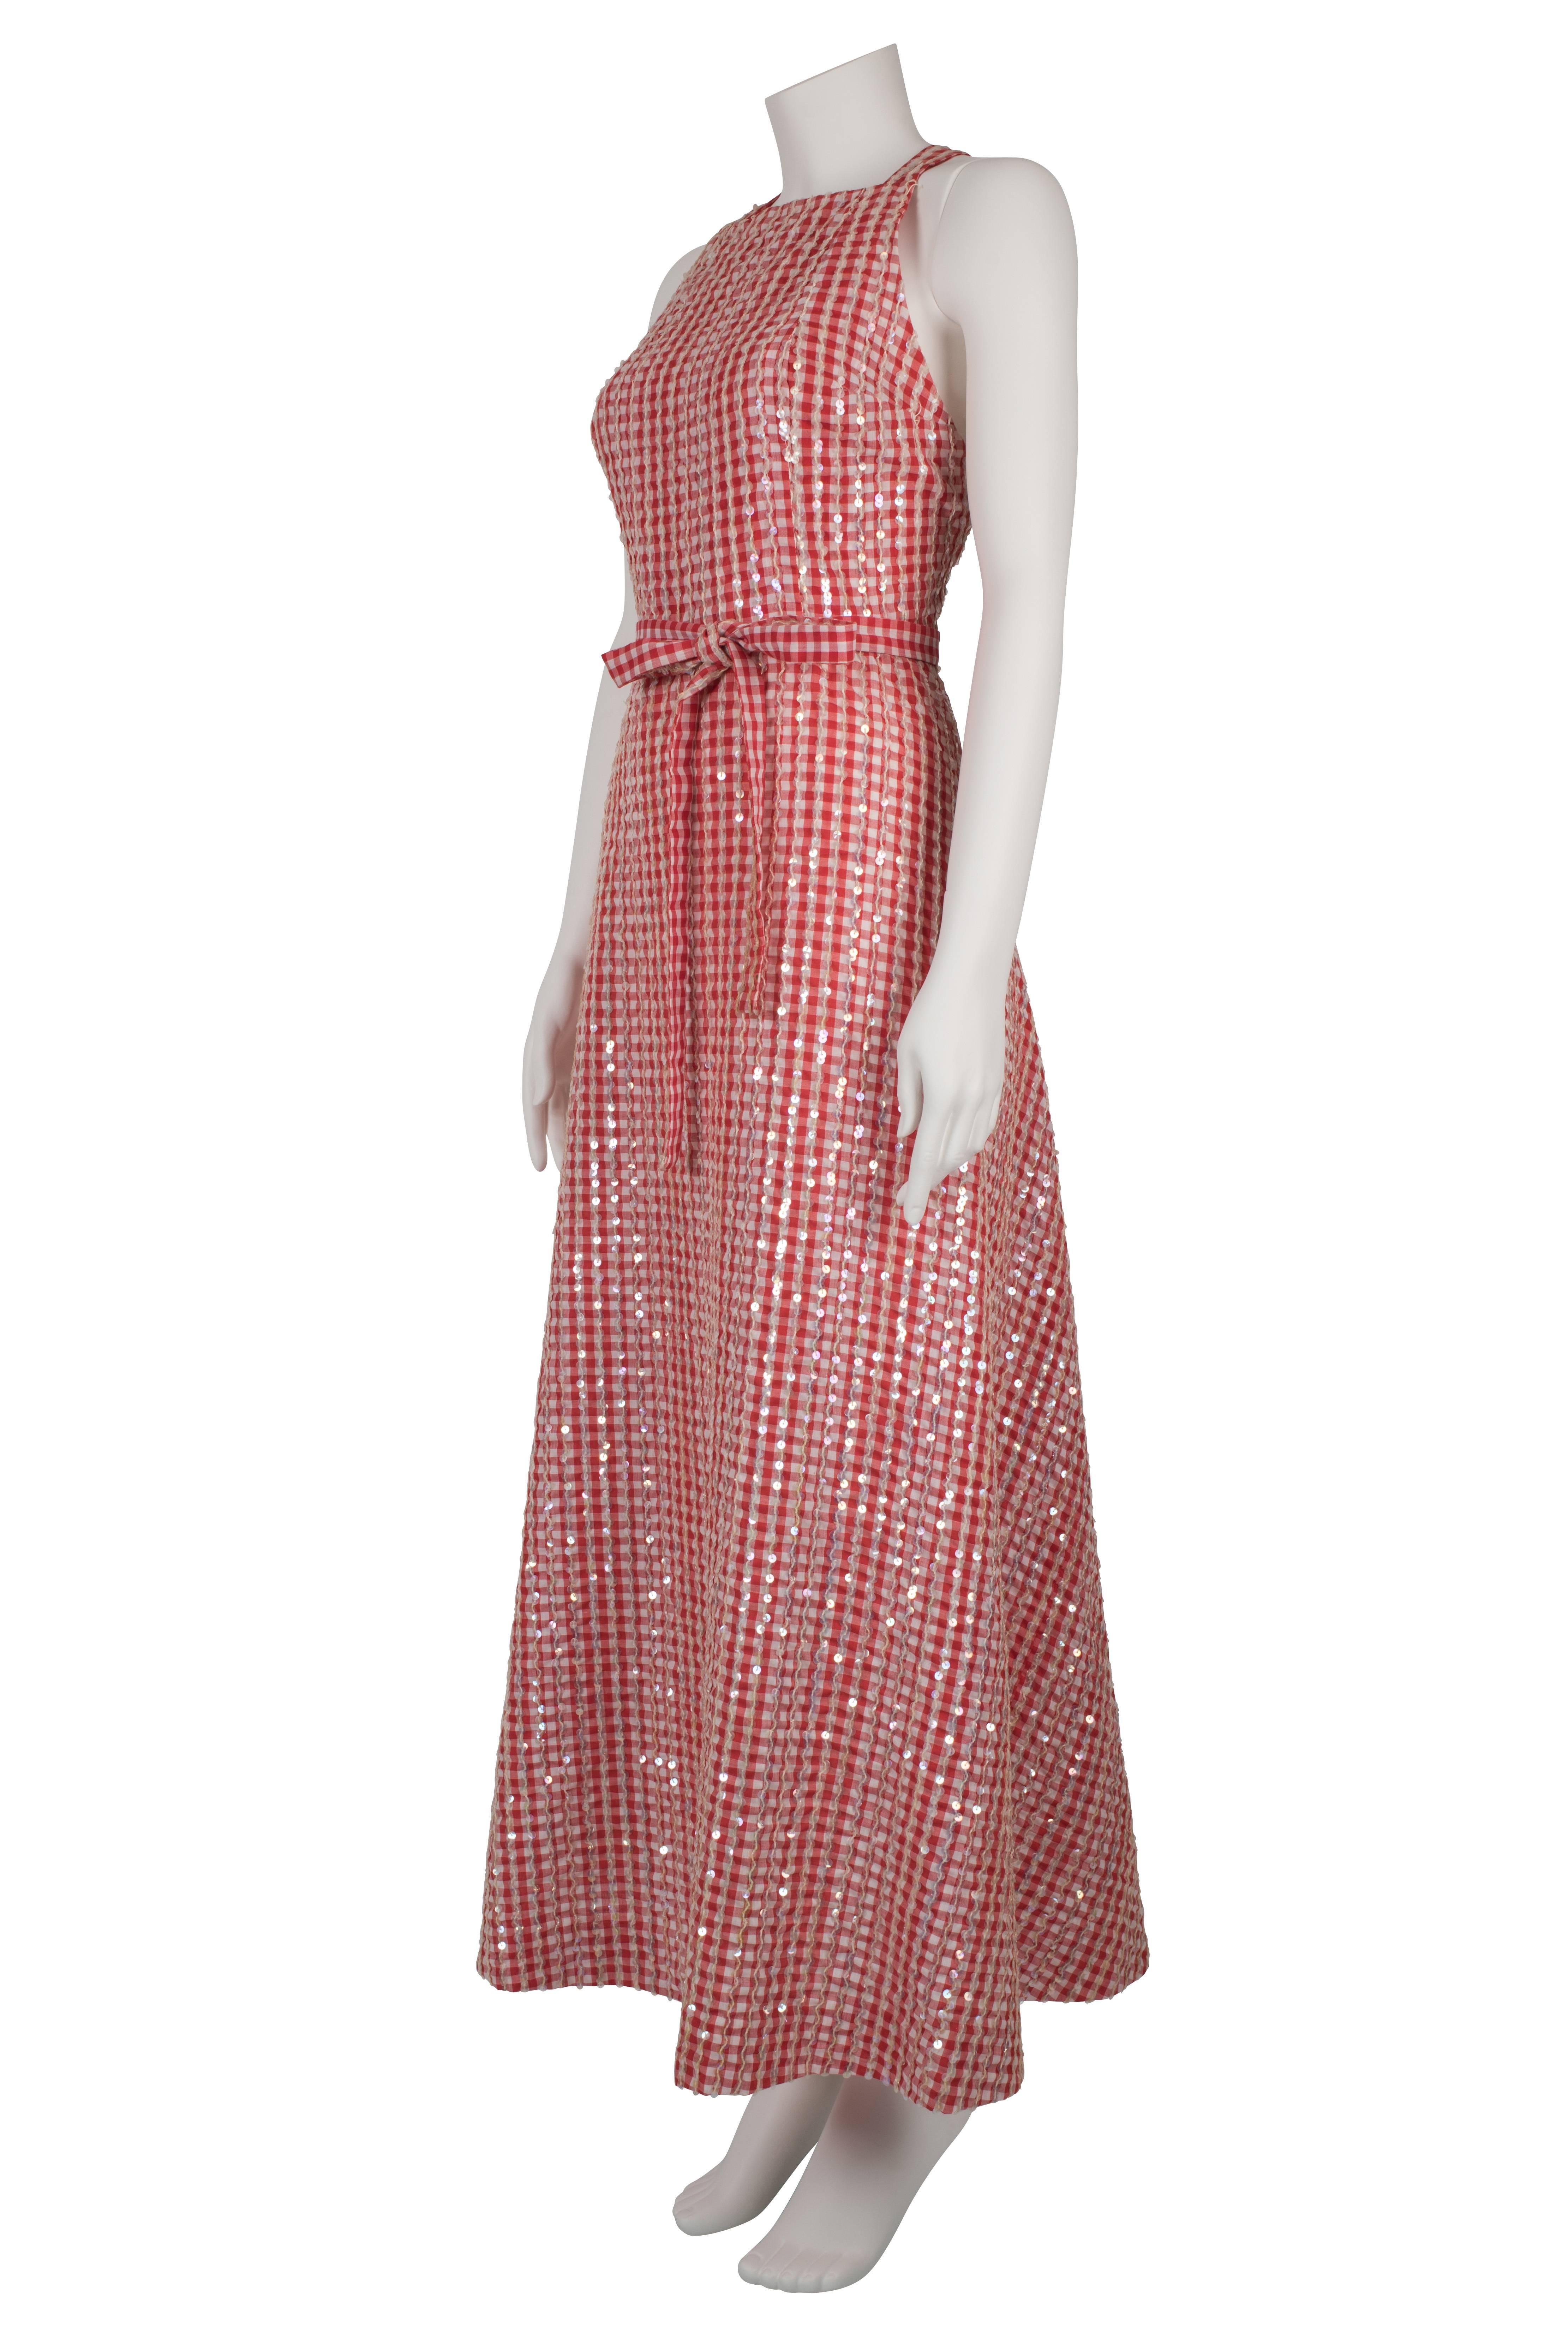 1970's Anthony Muto Sequinned Red Gingham Dress 2